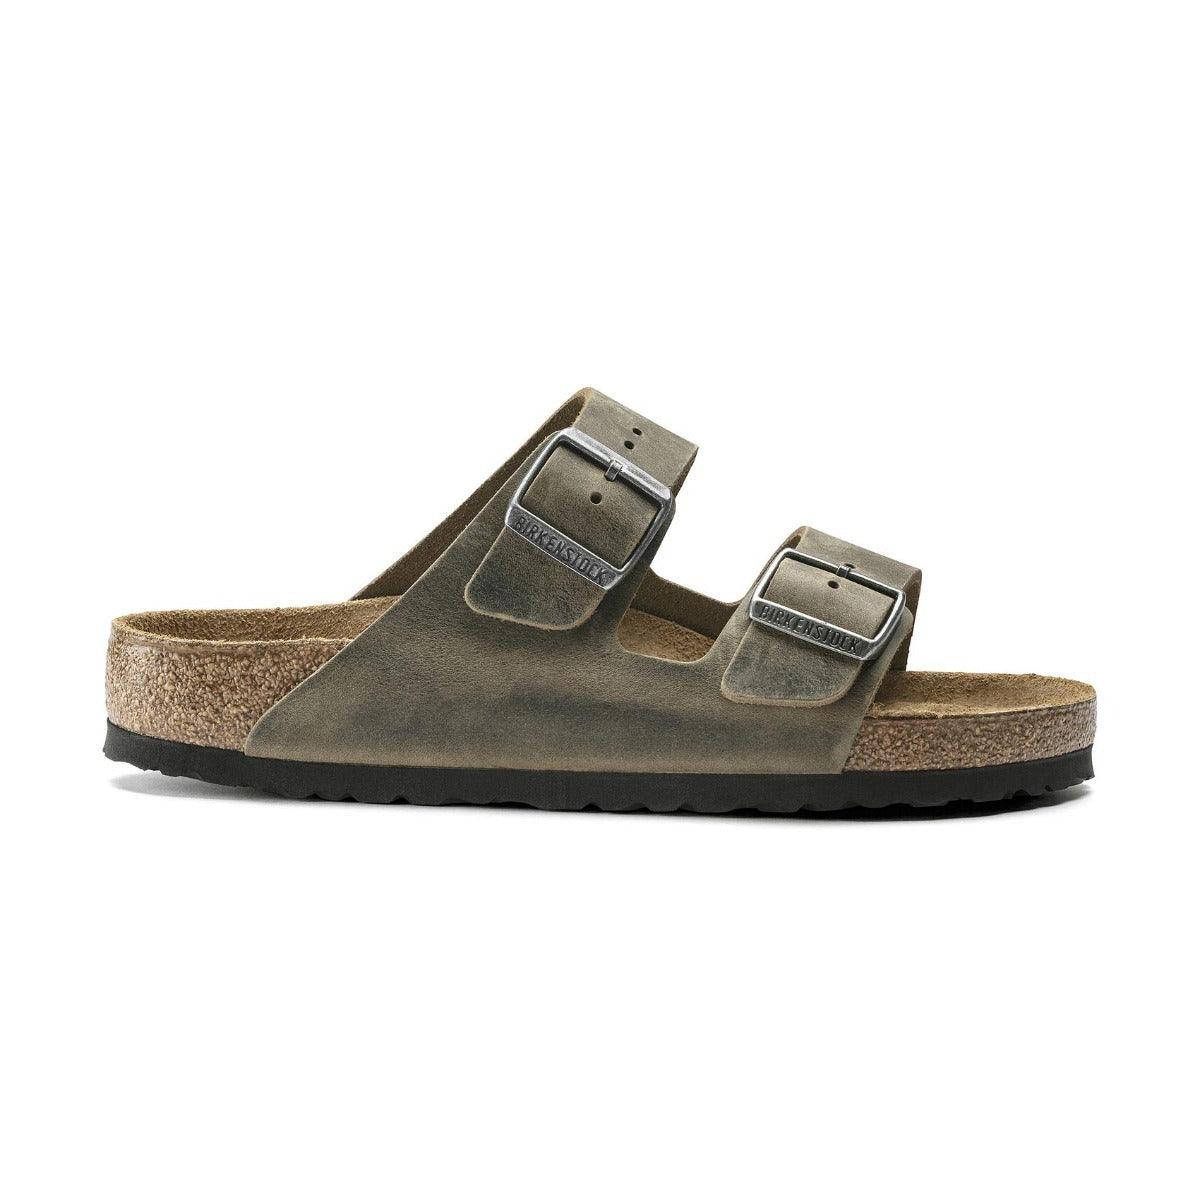 Arizona Soft Footbed Oiled Leather Sandals - Regular - The Next Pair